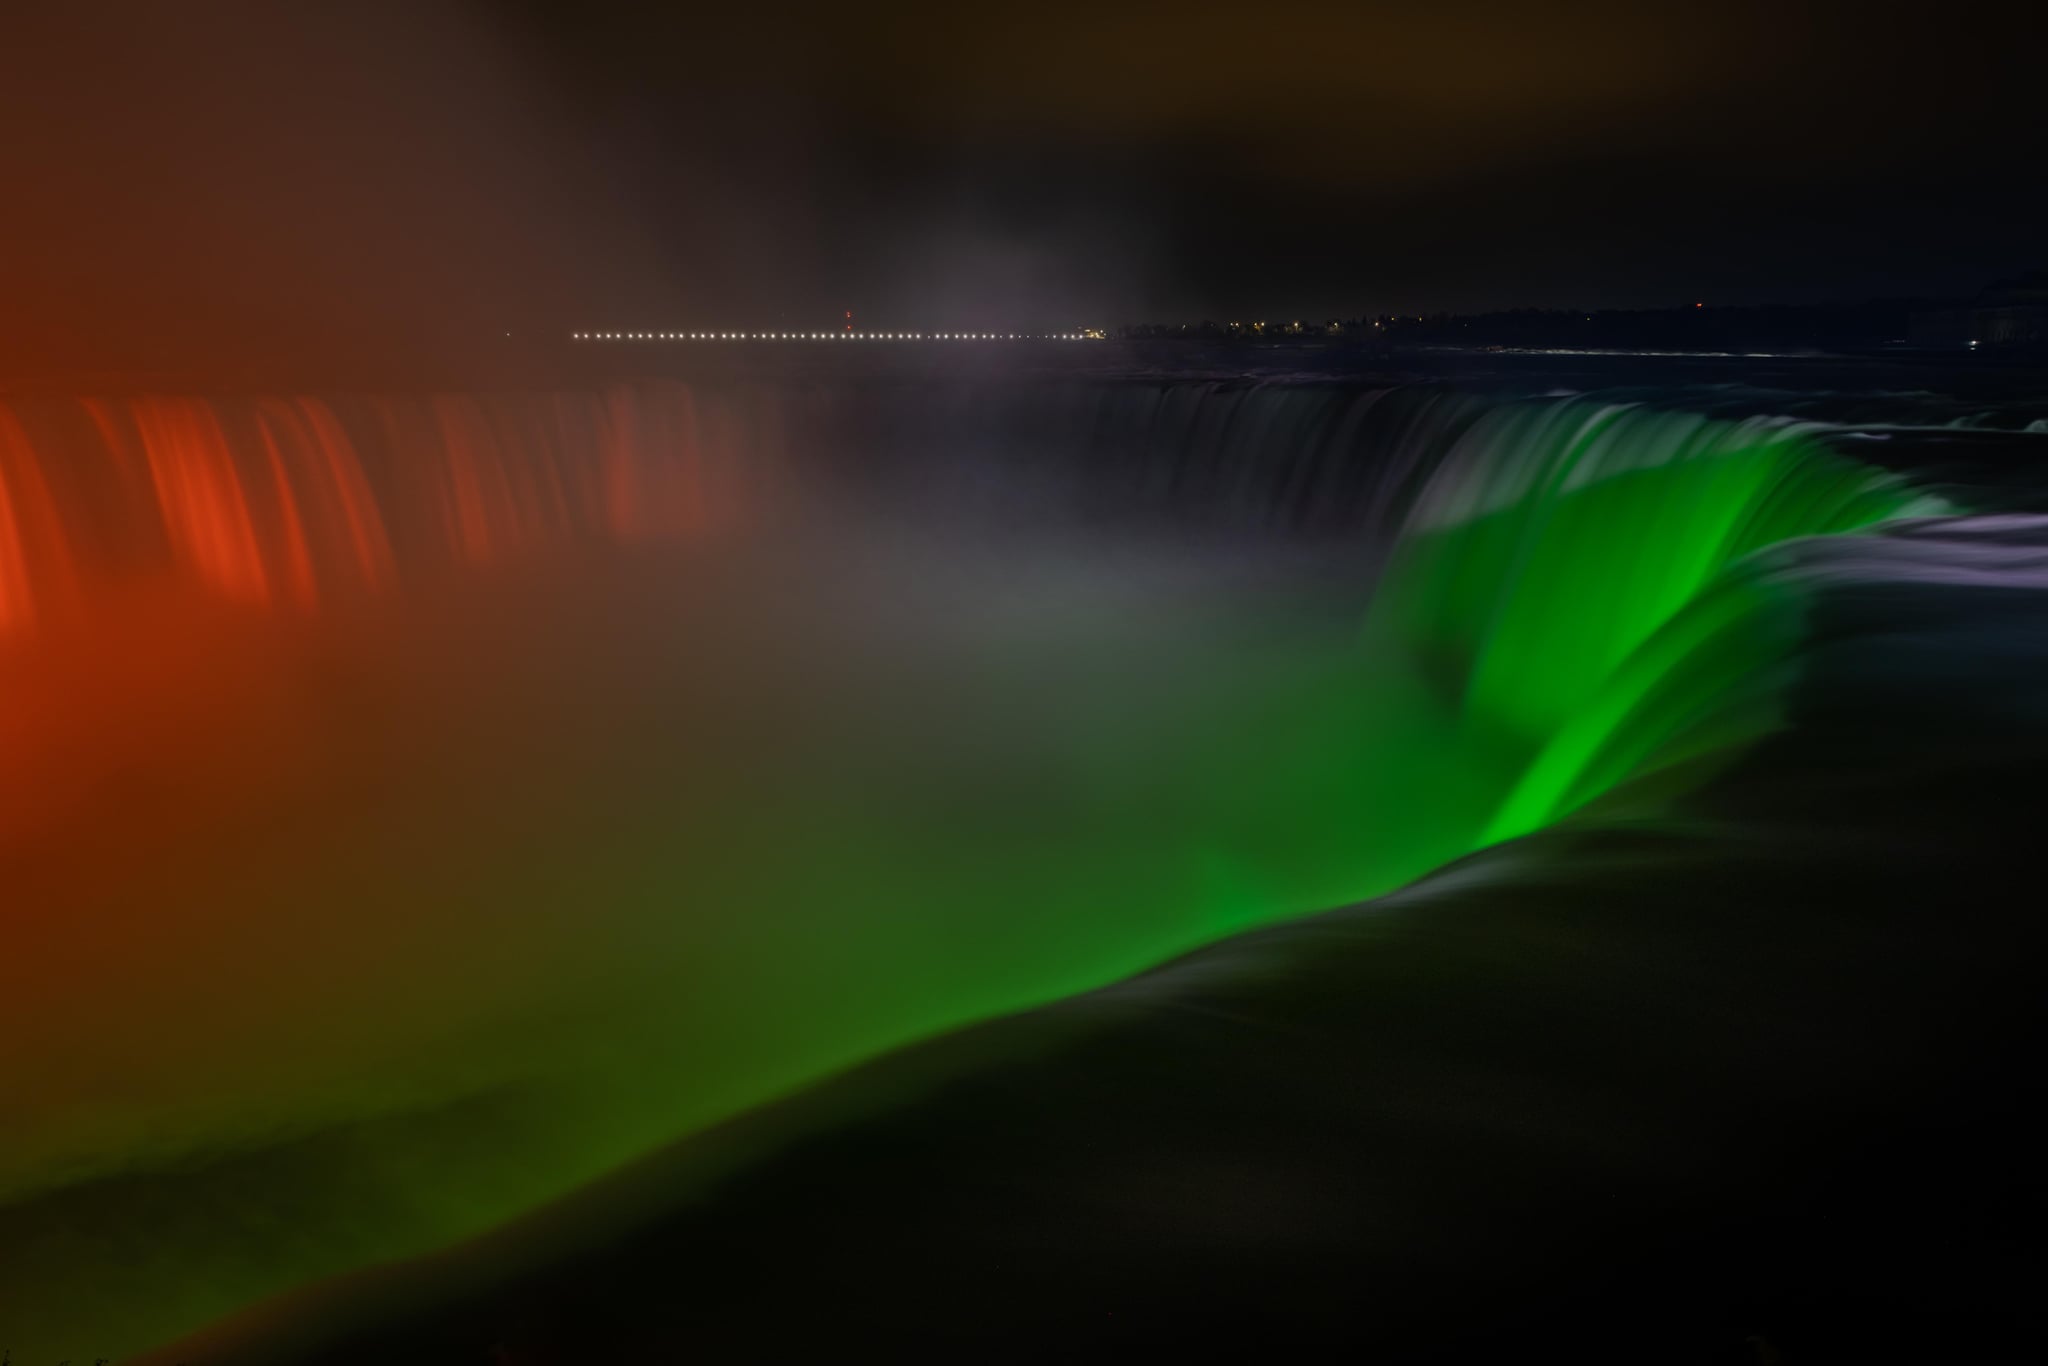 Niagara Falls to be Illuminated in Recognition of Black History Month